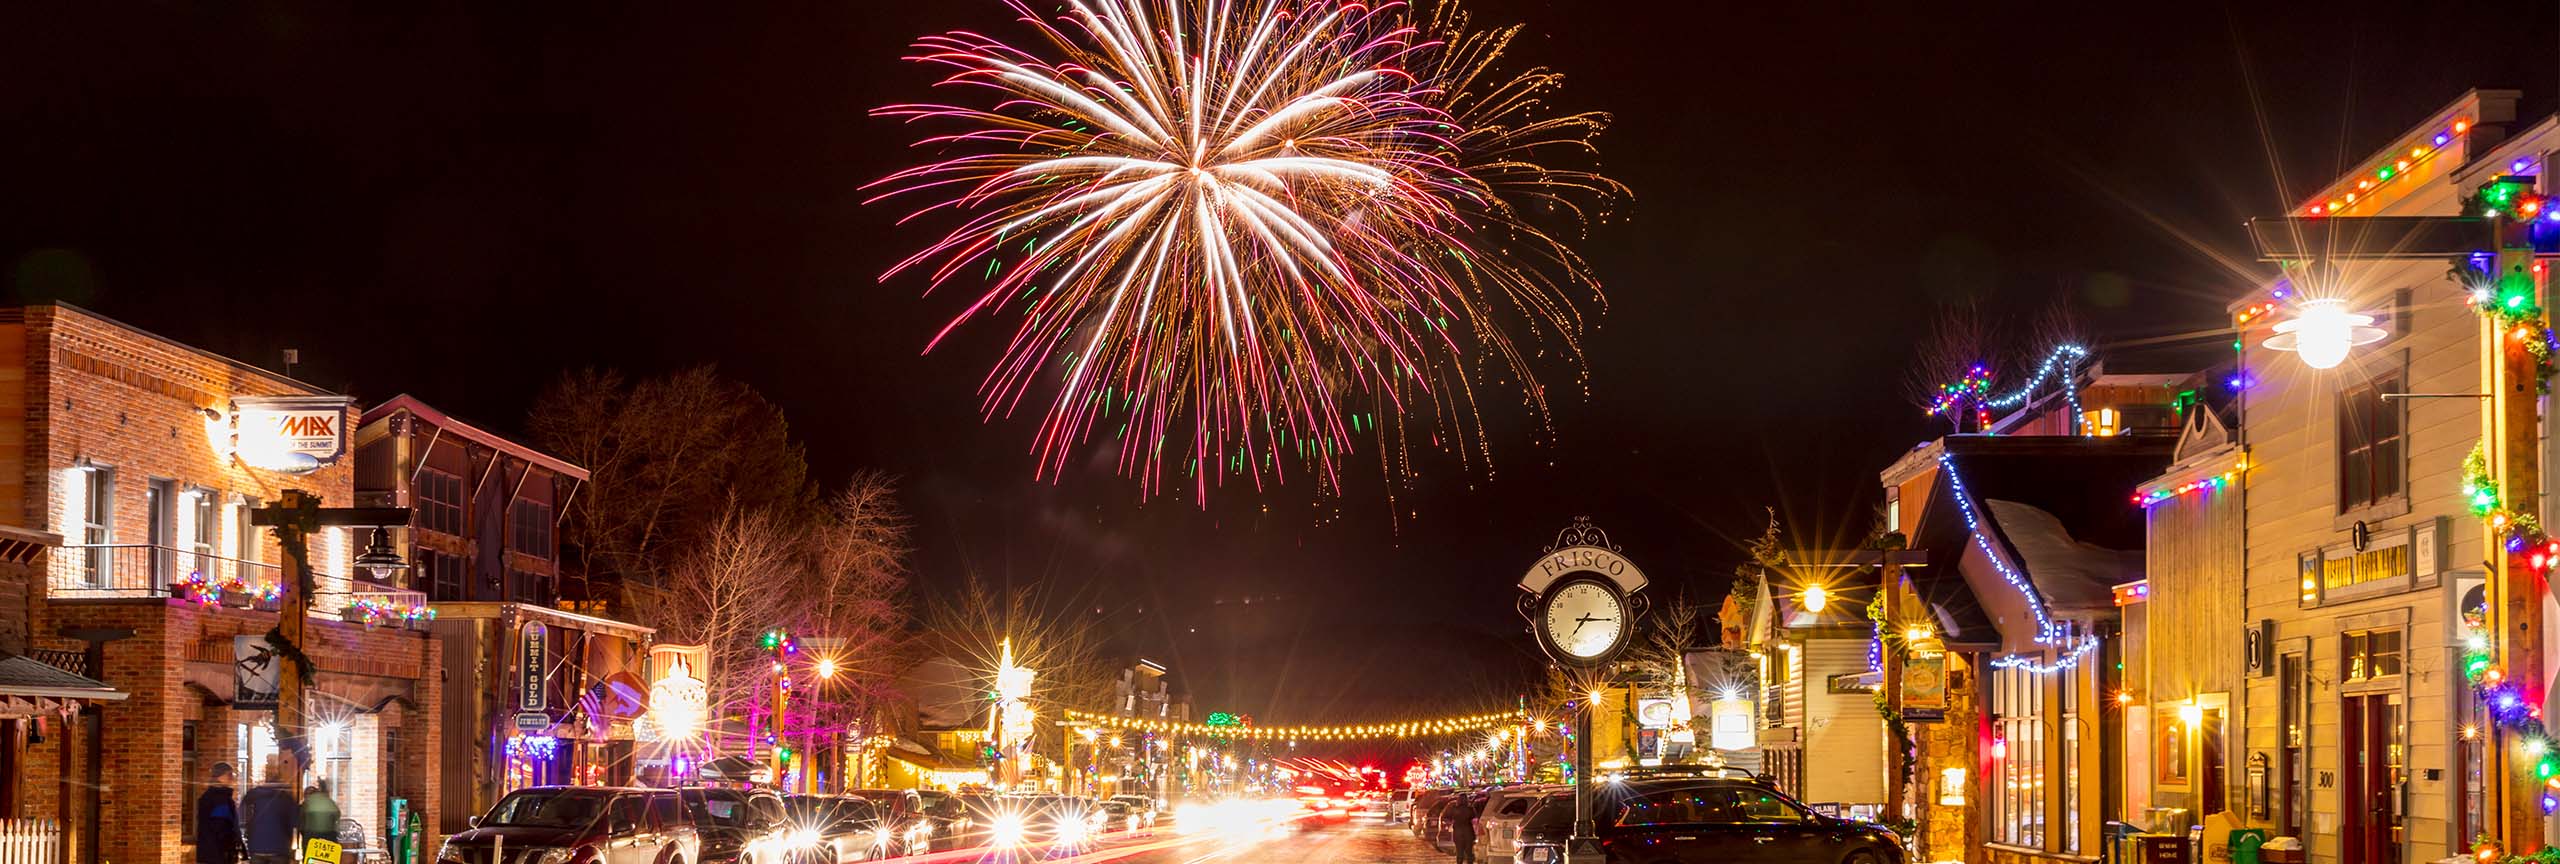 Fireworks over Main Street in Frisco in winter